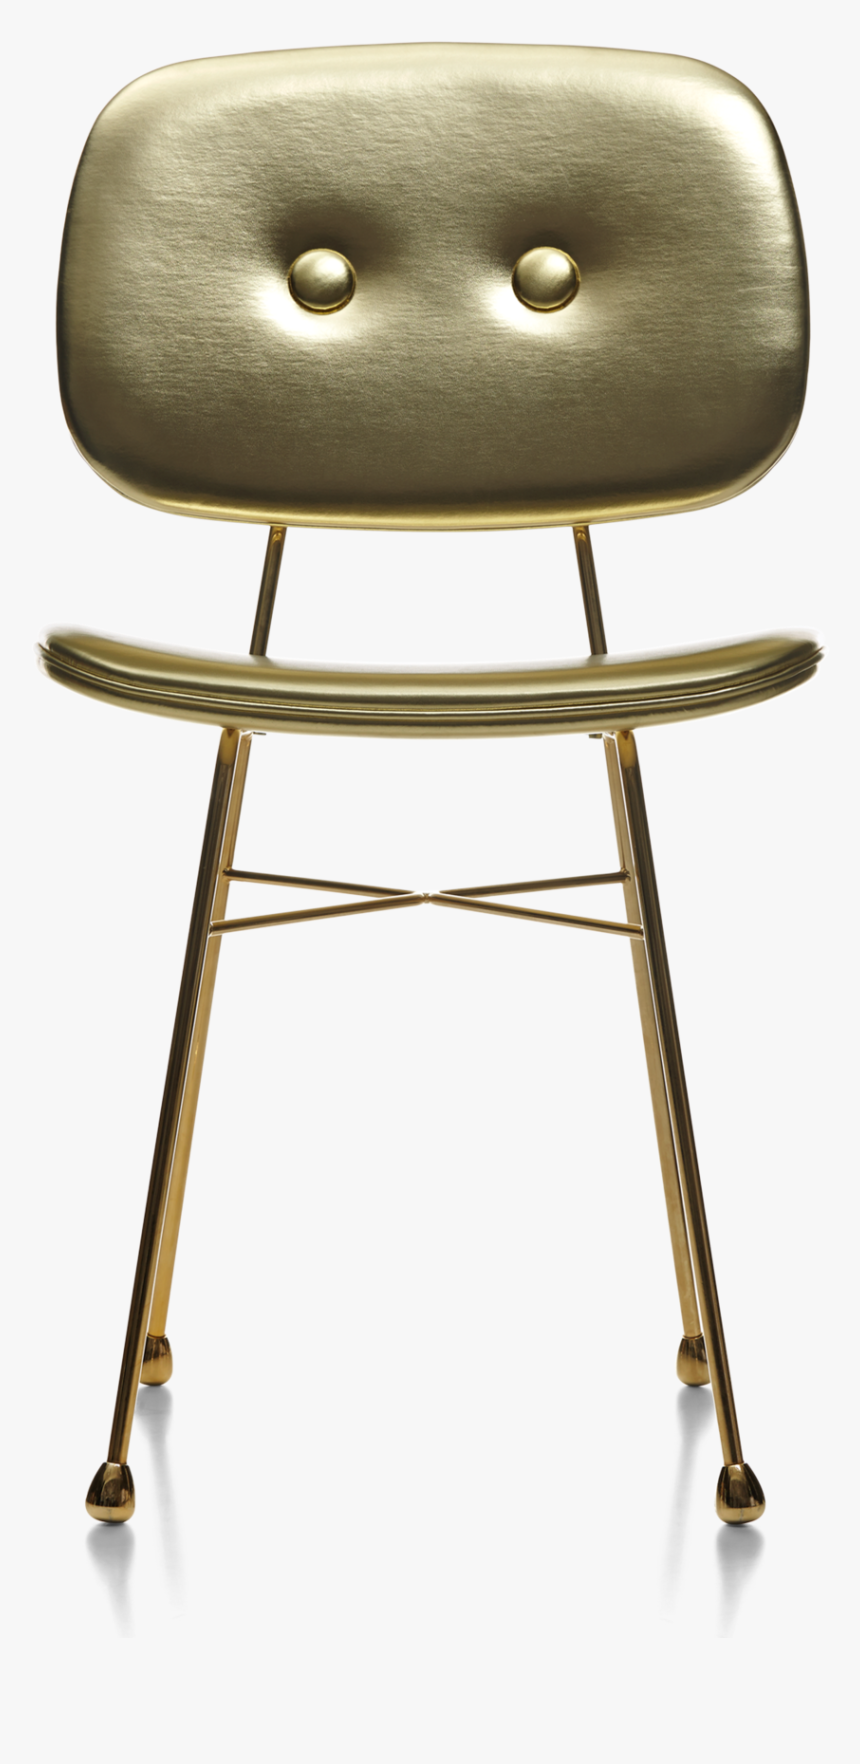 Chair Png Images, Transparent Png, Free Download